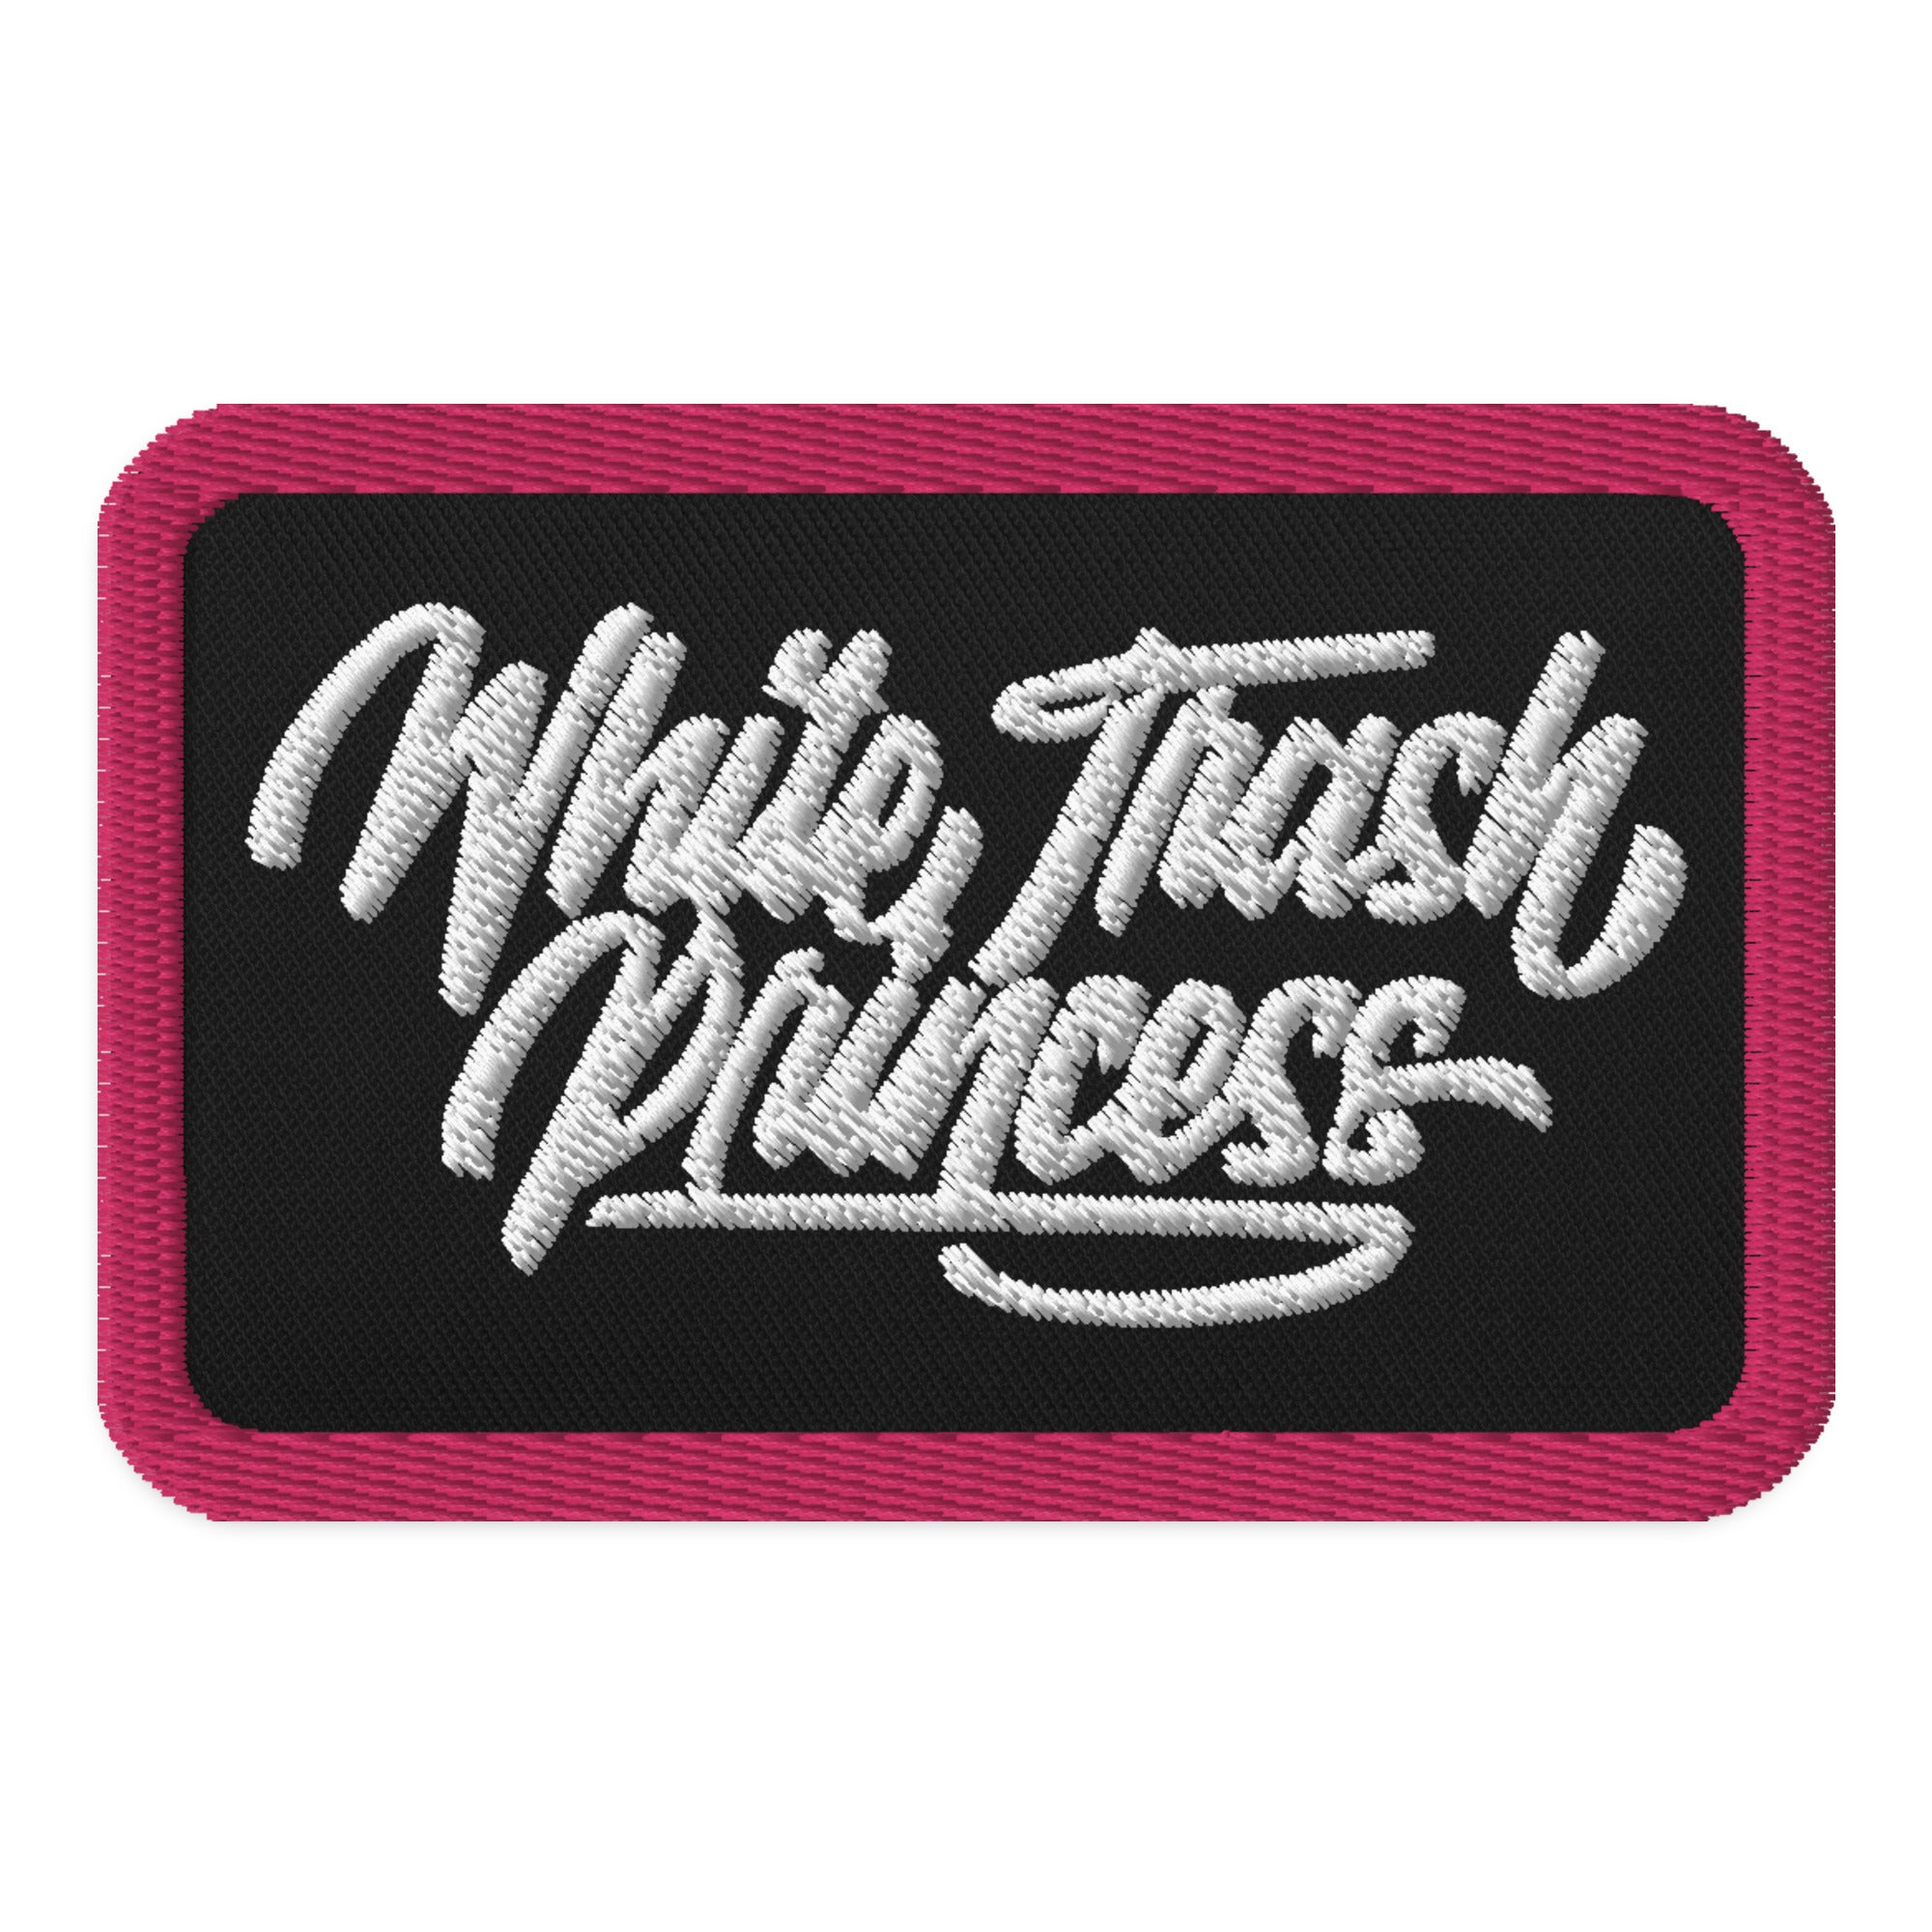 White Trash Embroidered Patch